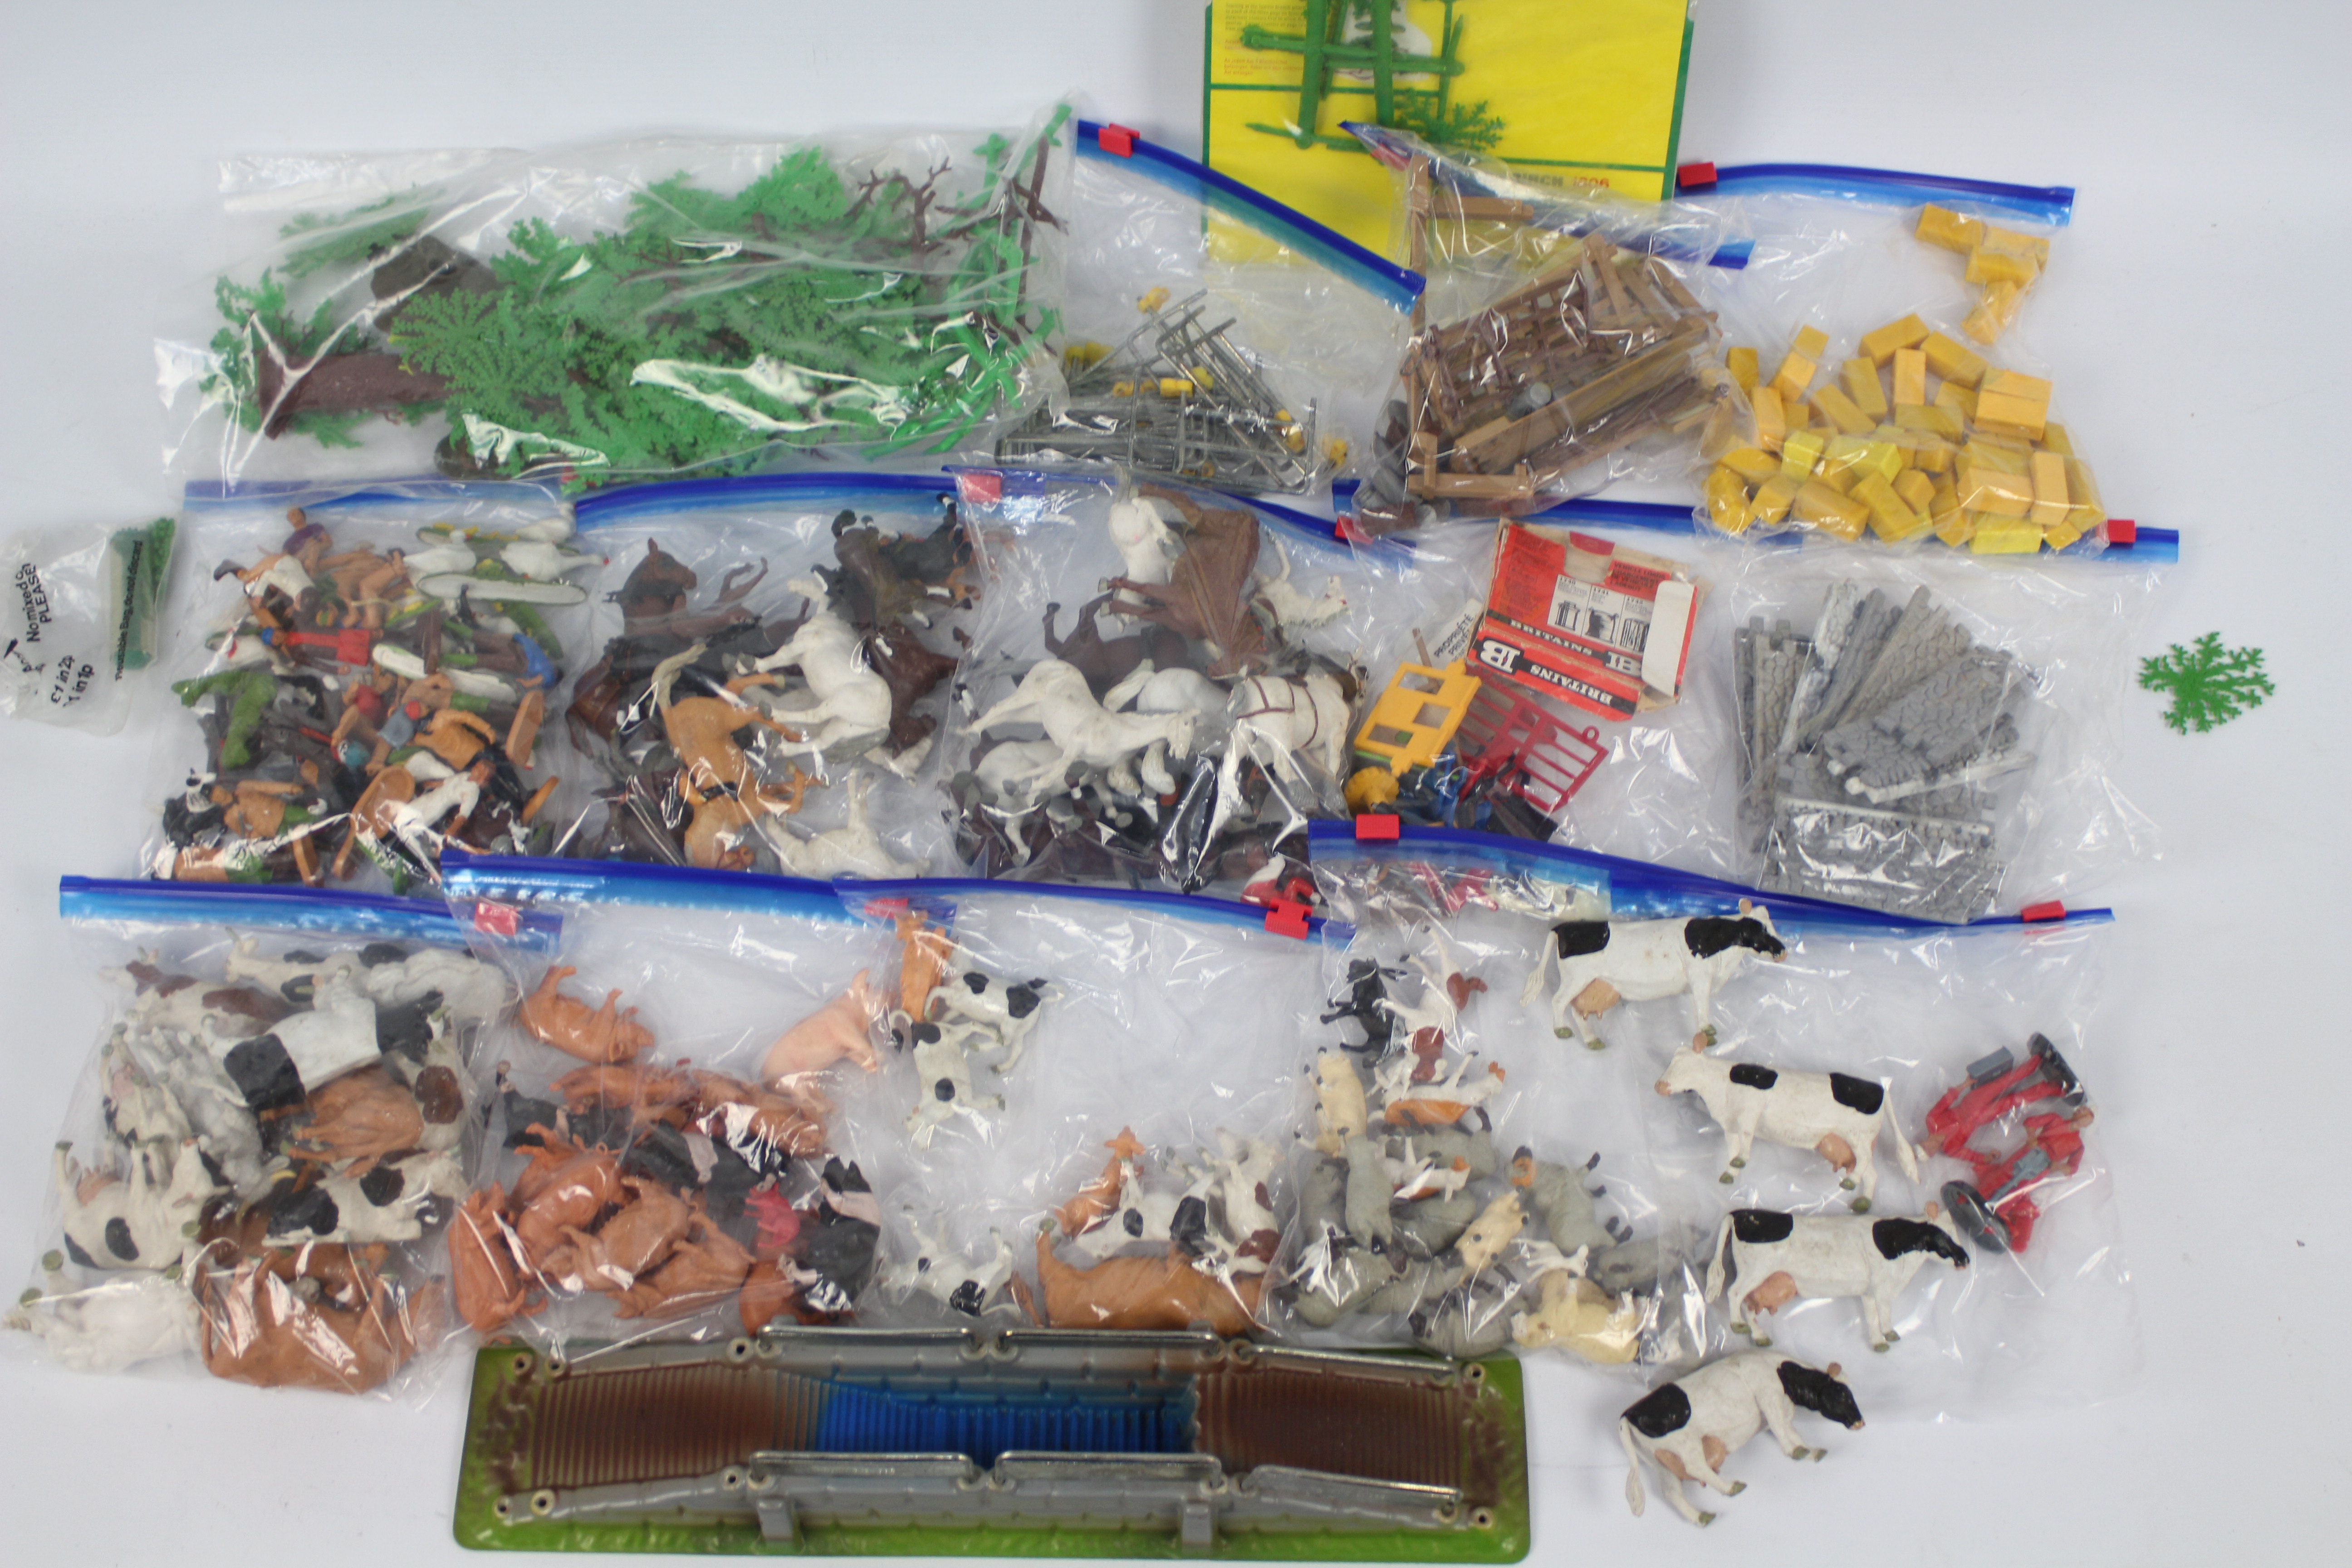 Britains - A large loose collection of Britains plastic farm animals, workers, and accessories.